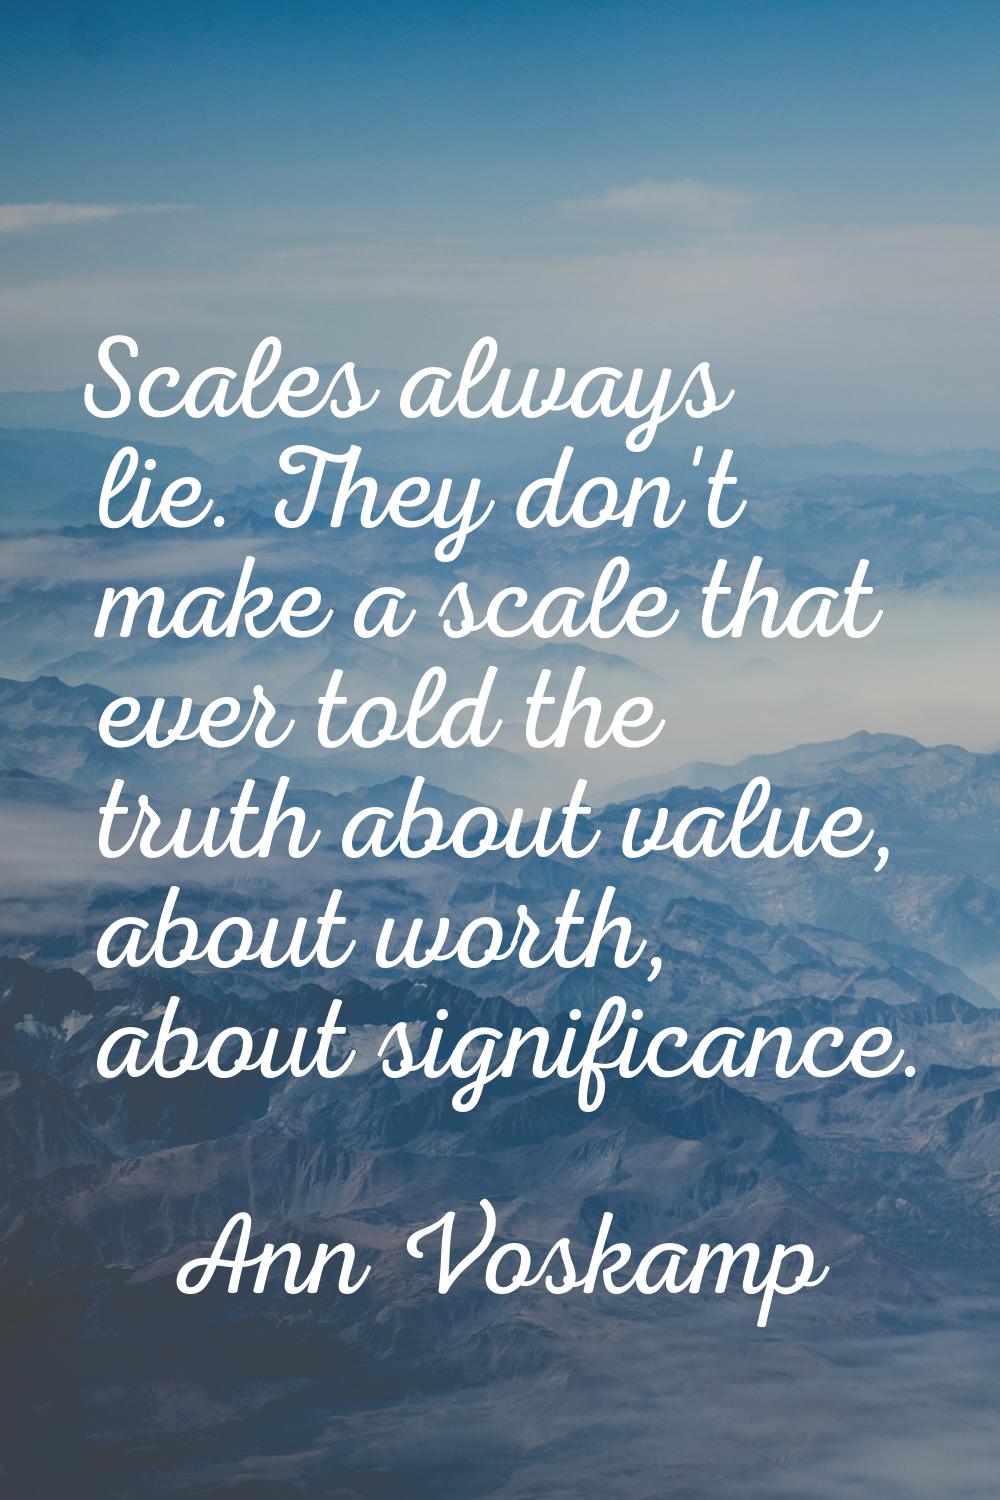 Scales always lie. They don't make a scale that ever told the truth about value, about worth, about